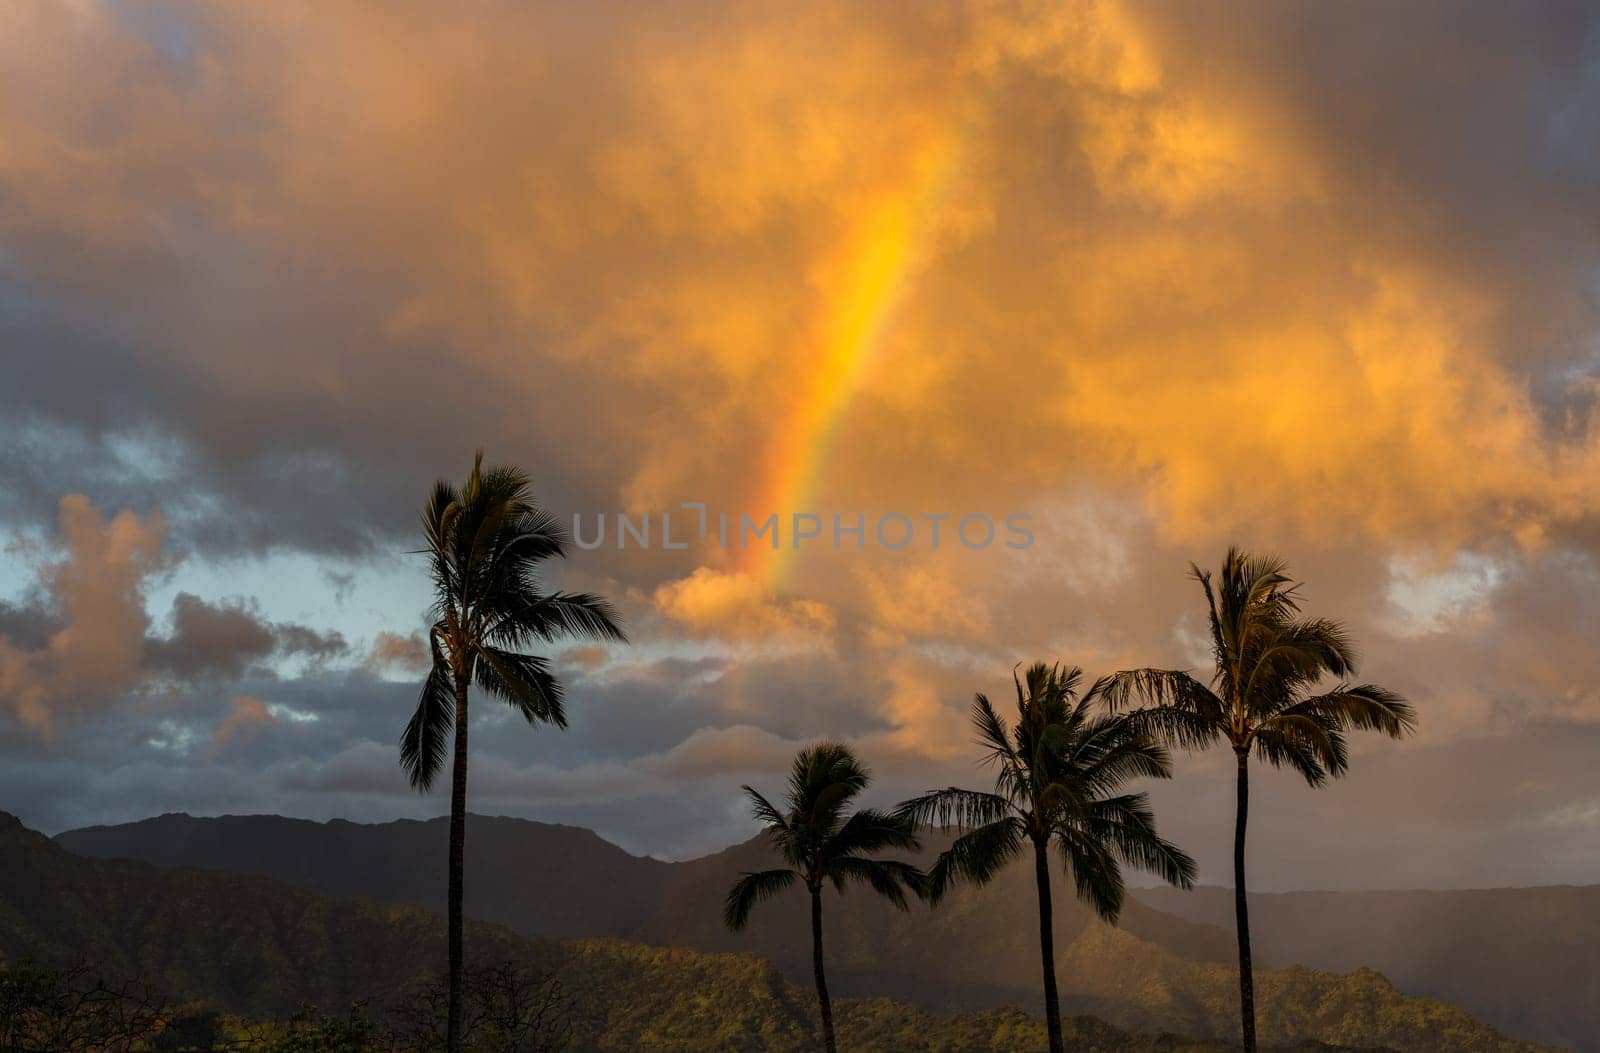 Sunrise illuminates storm clouds and rainbow over Hanalei mountains from Princeville overlook of bay